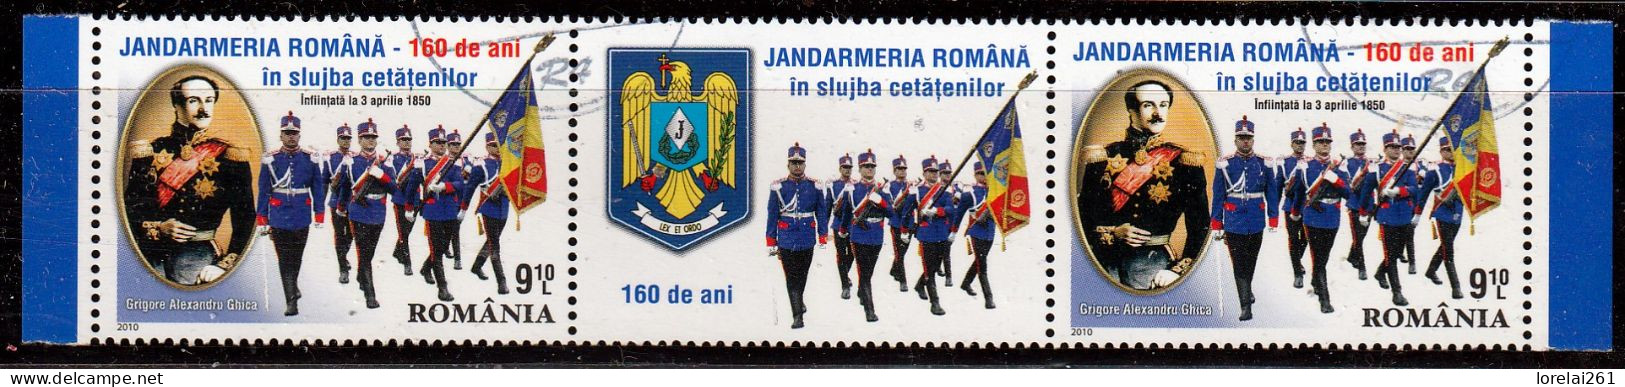 2010 - Gendarmerie Roumaine Mi No  6425 - Used Stamps